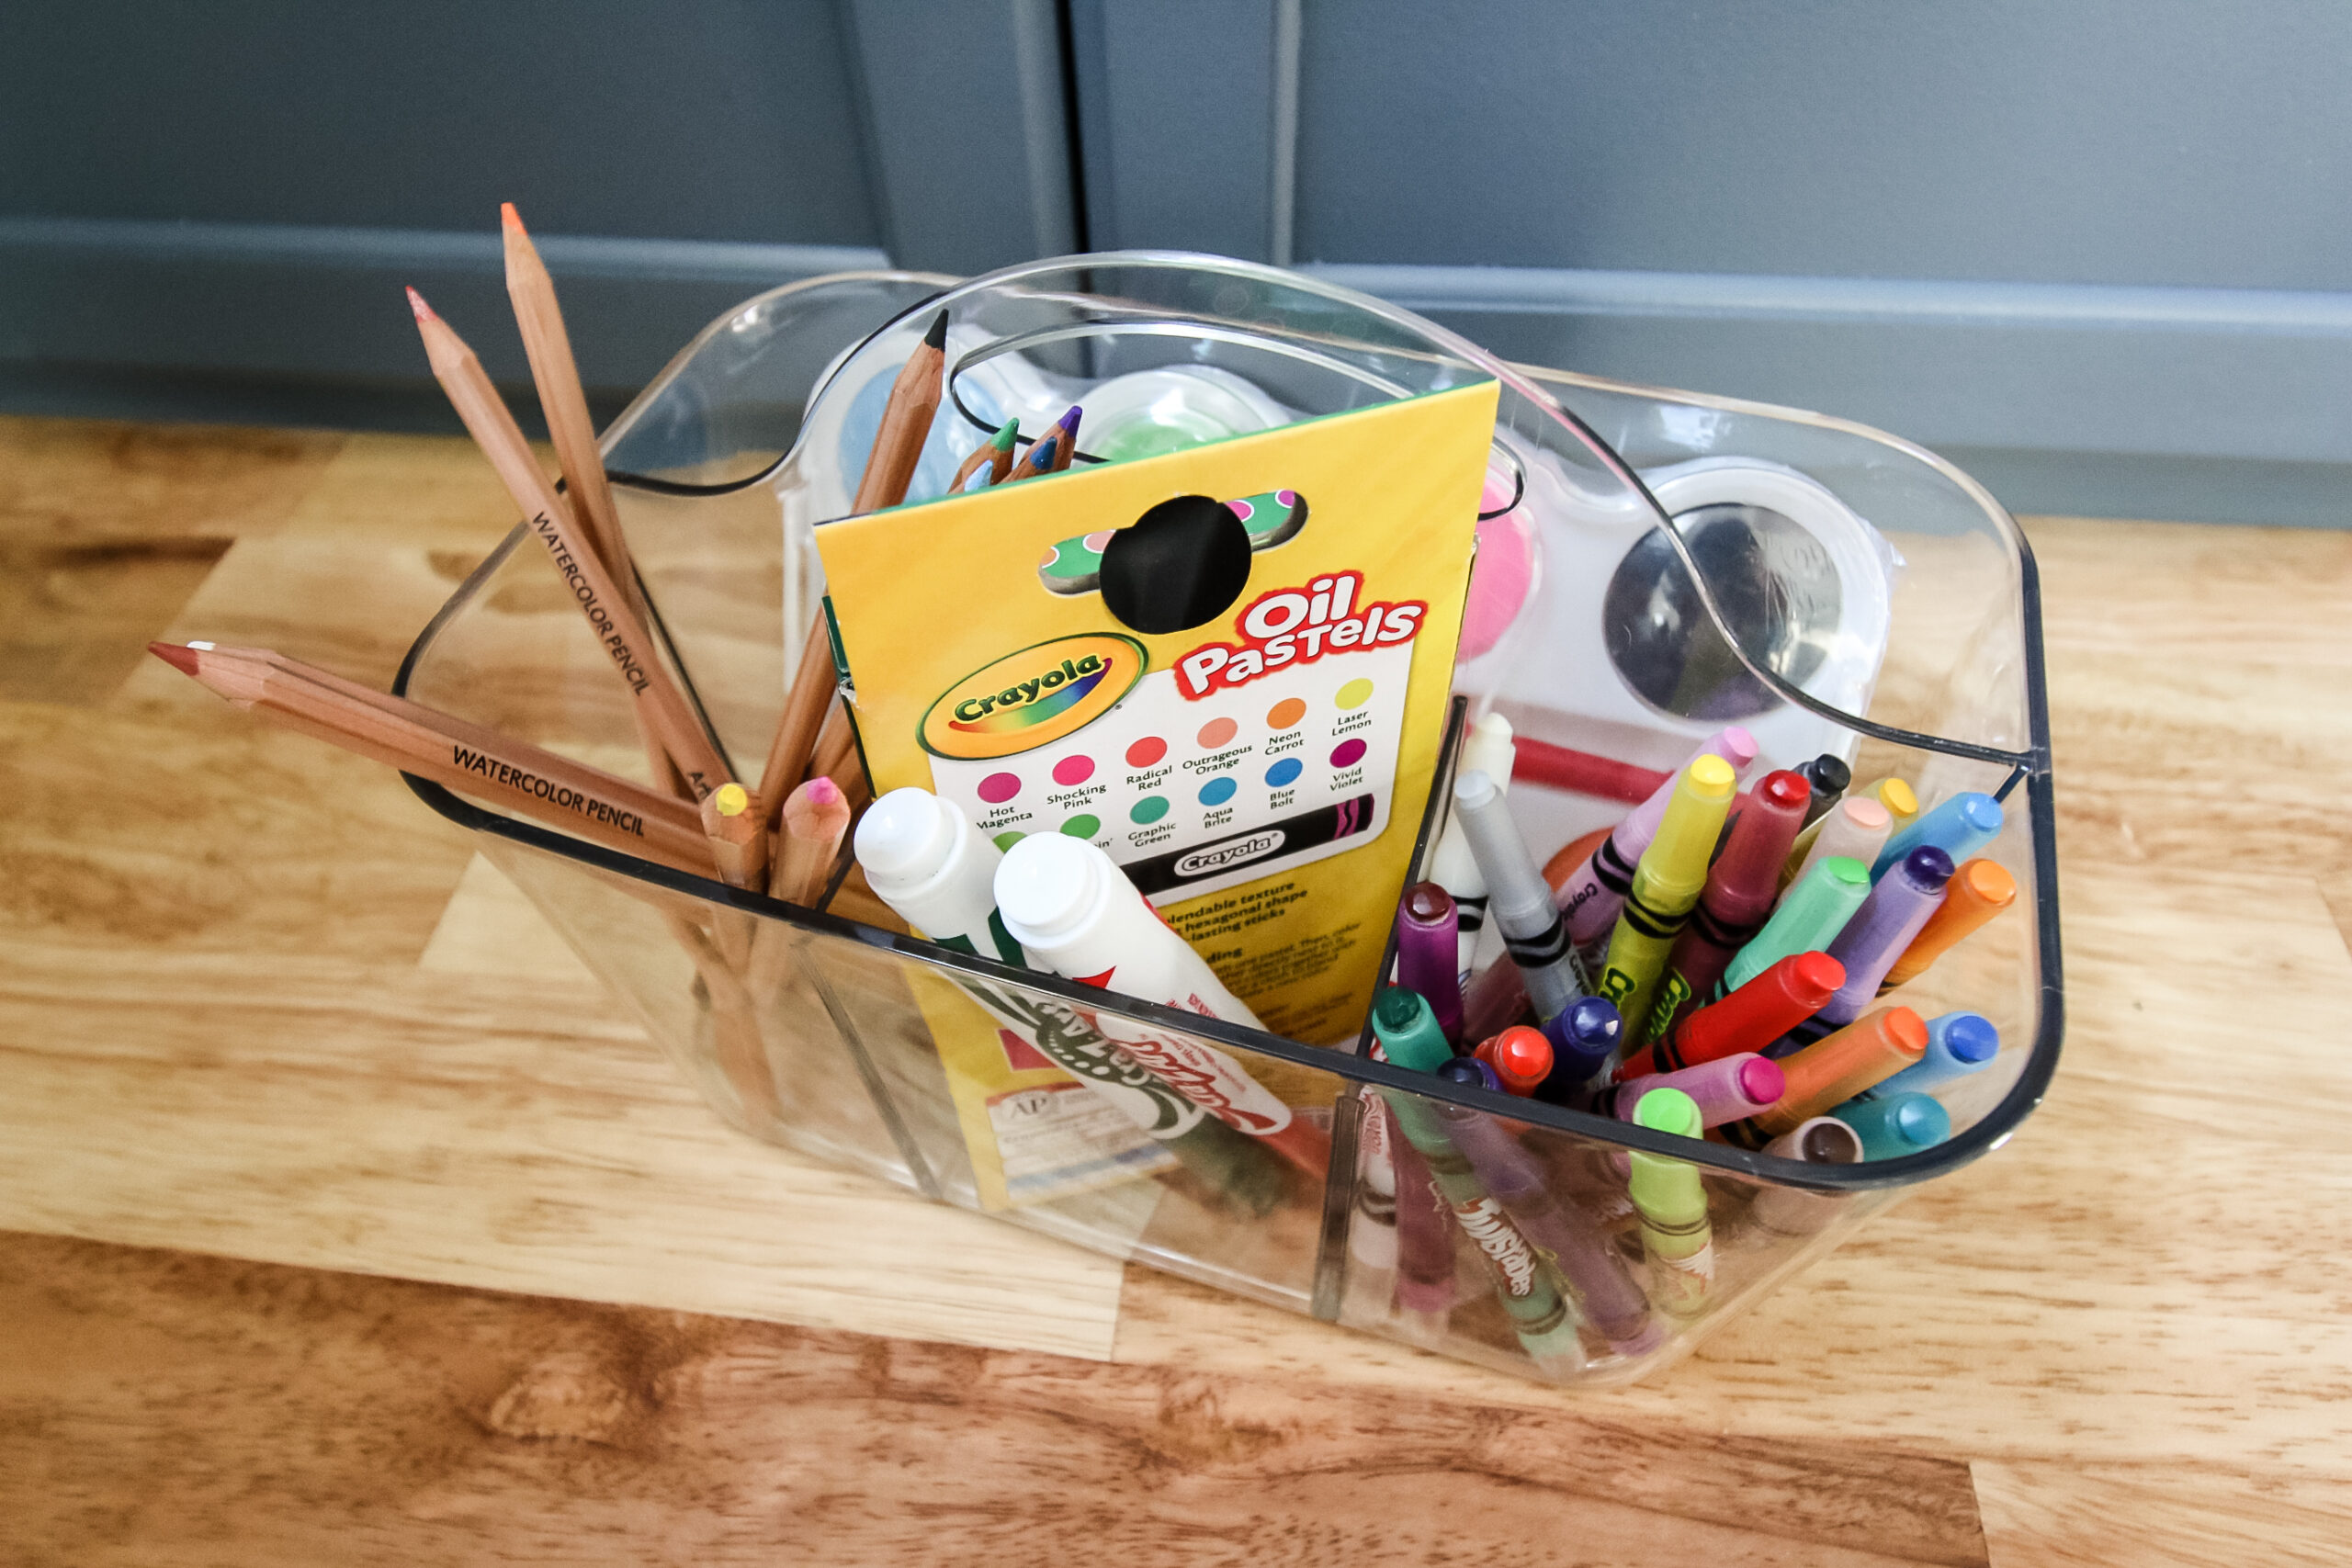 How To Store Craft Supplies